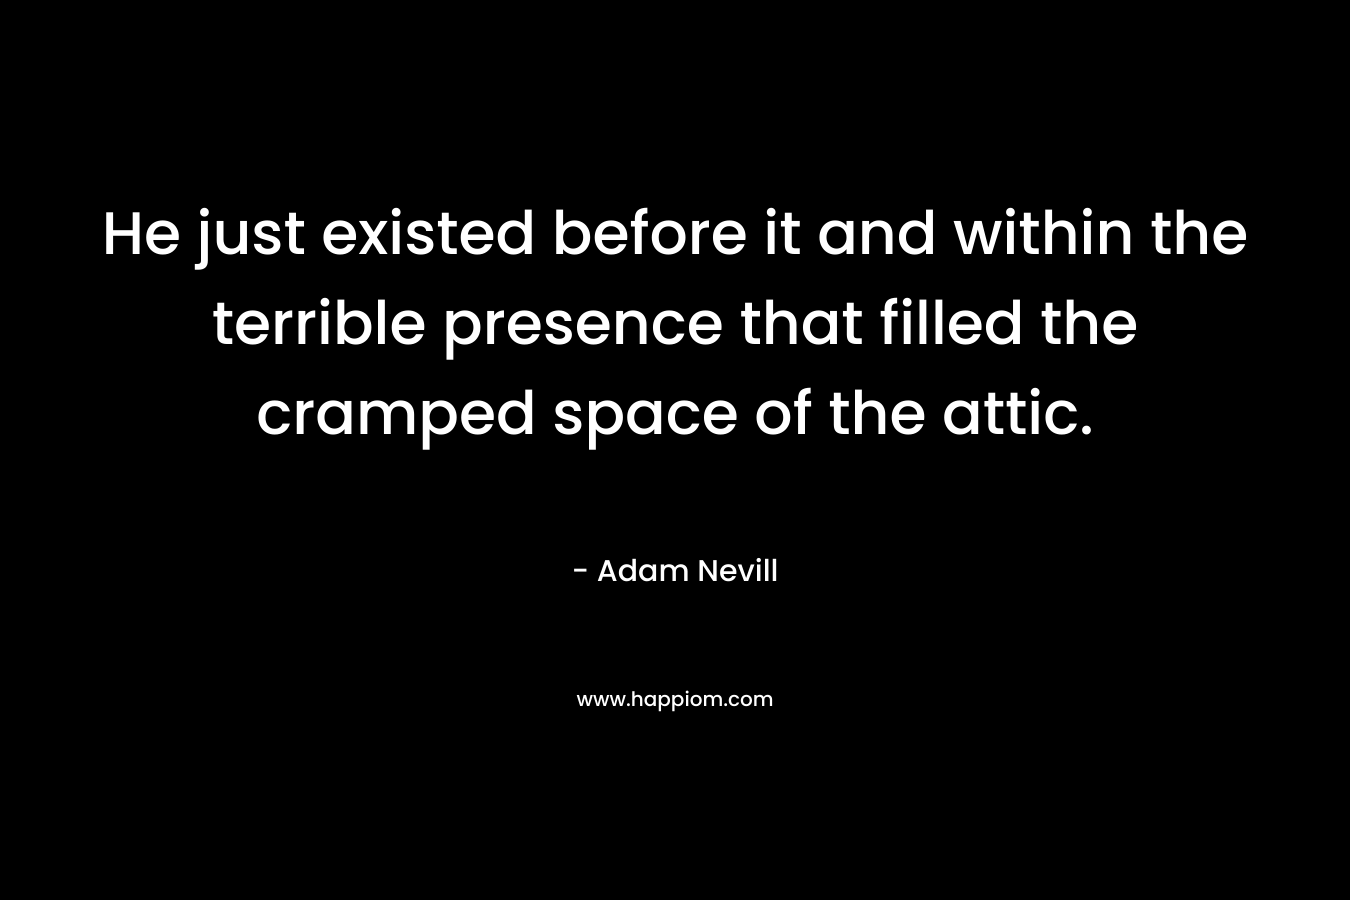 He just existed before it and within the terrible presence that filled the cramped space of the attic. – Adam Nevill